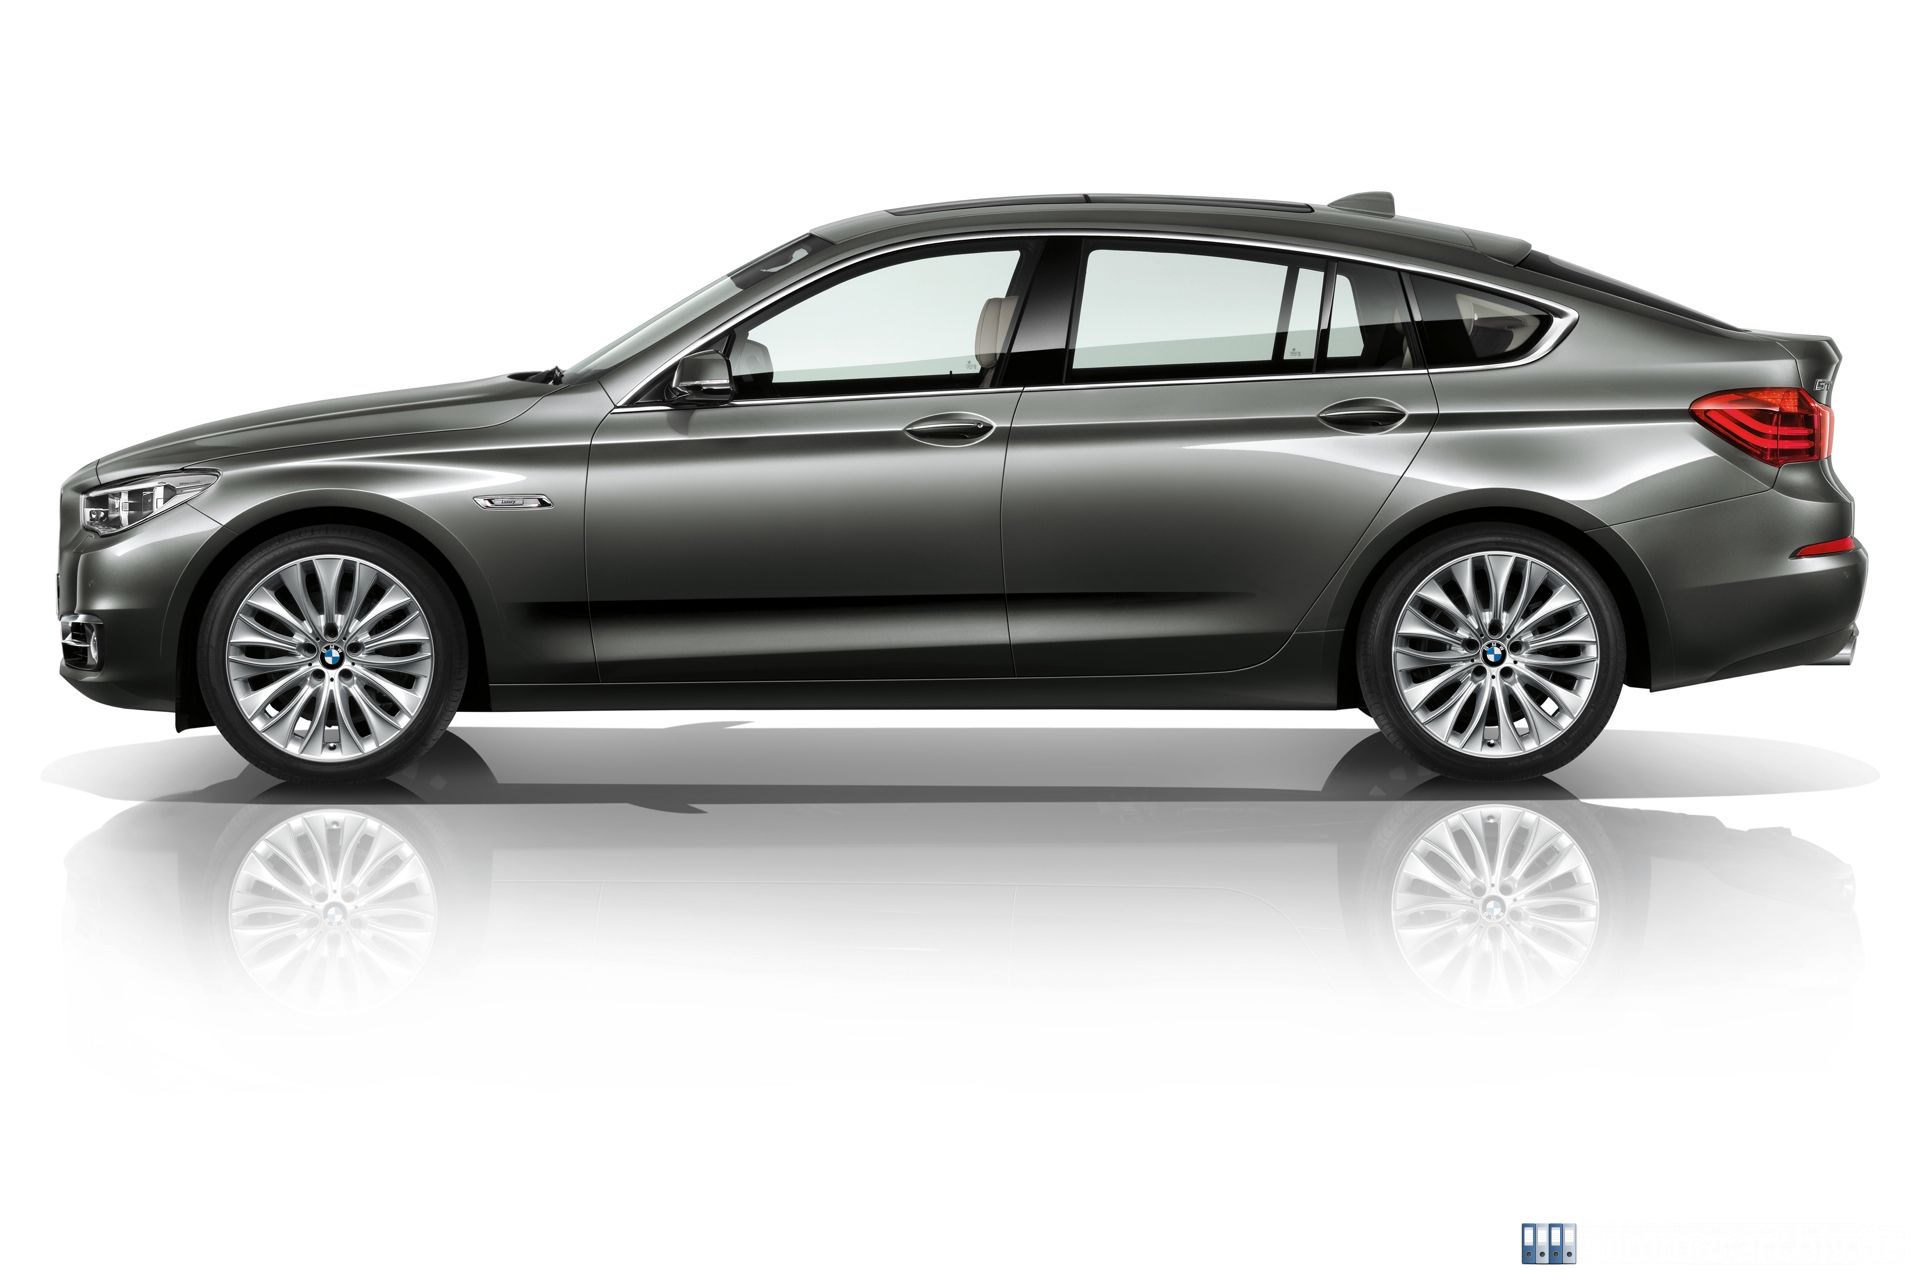 sharp Armstrong Come up with Model Archive for BMW models · BMW 535i xDrive Gran Turismo - Luxury Line ·  bmwarchive.org